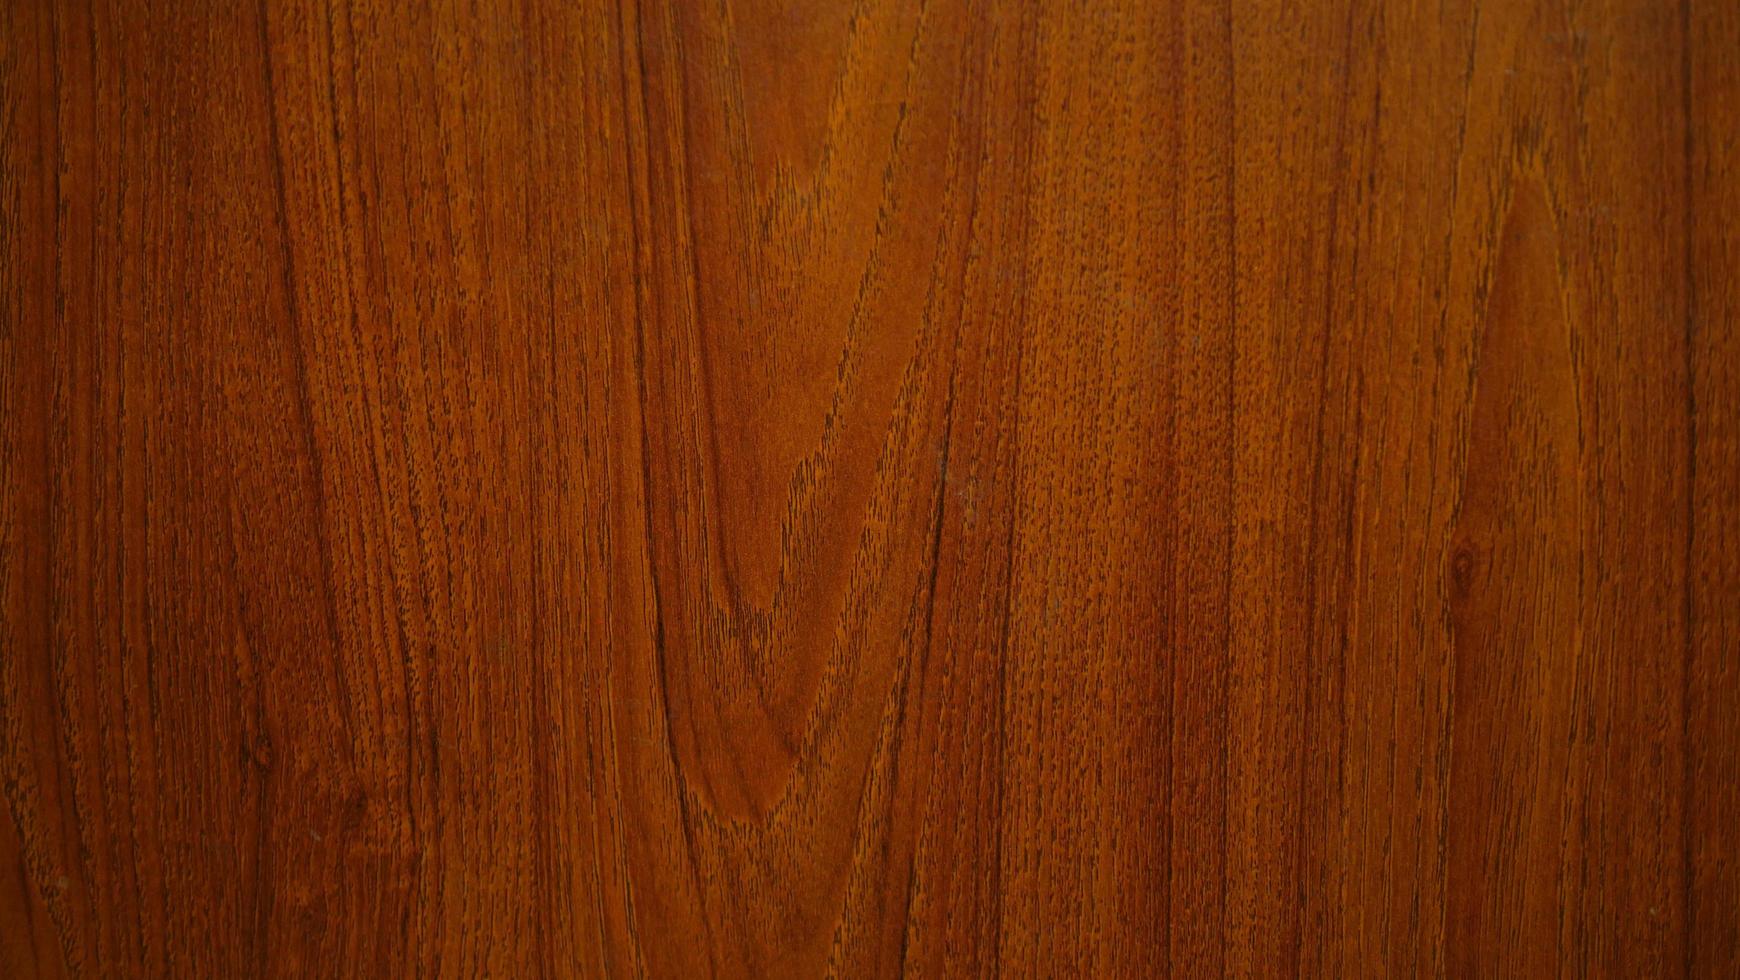 Wood grain texture for making Background or Wallpaper. Wood grain pattern, red and black tone. Red teak wood pattern. photo